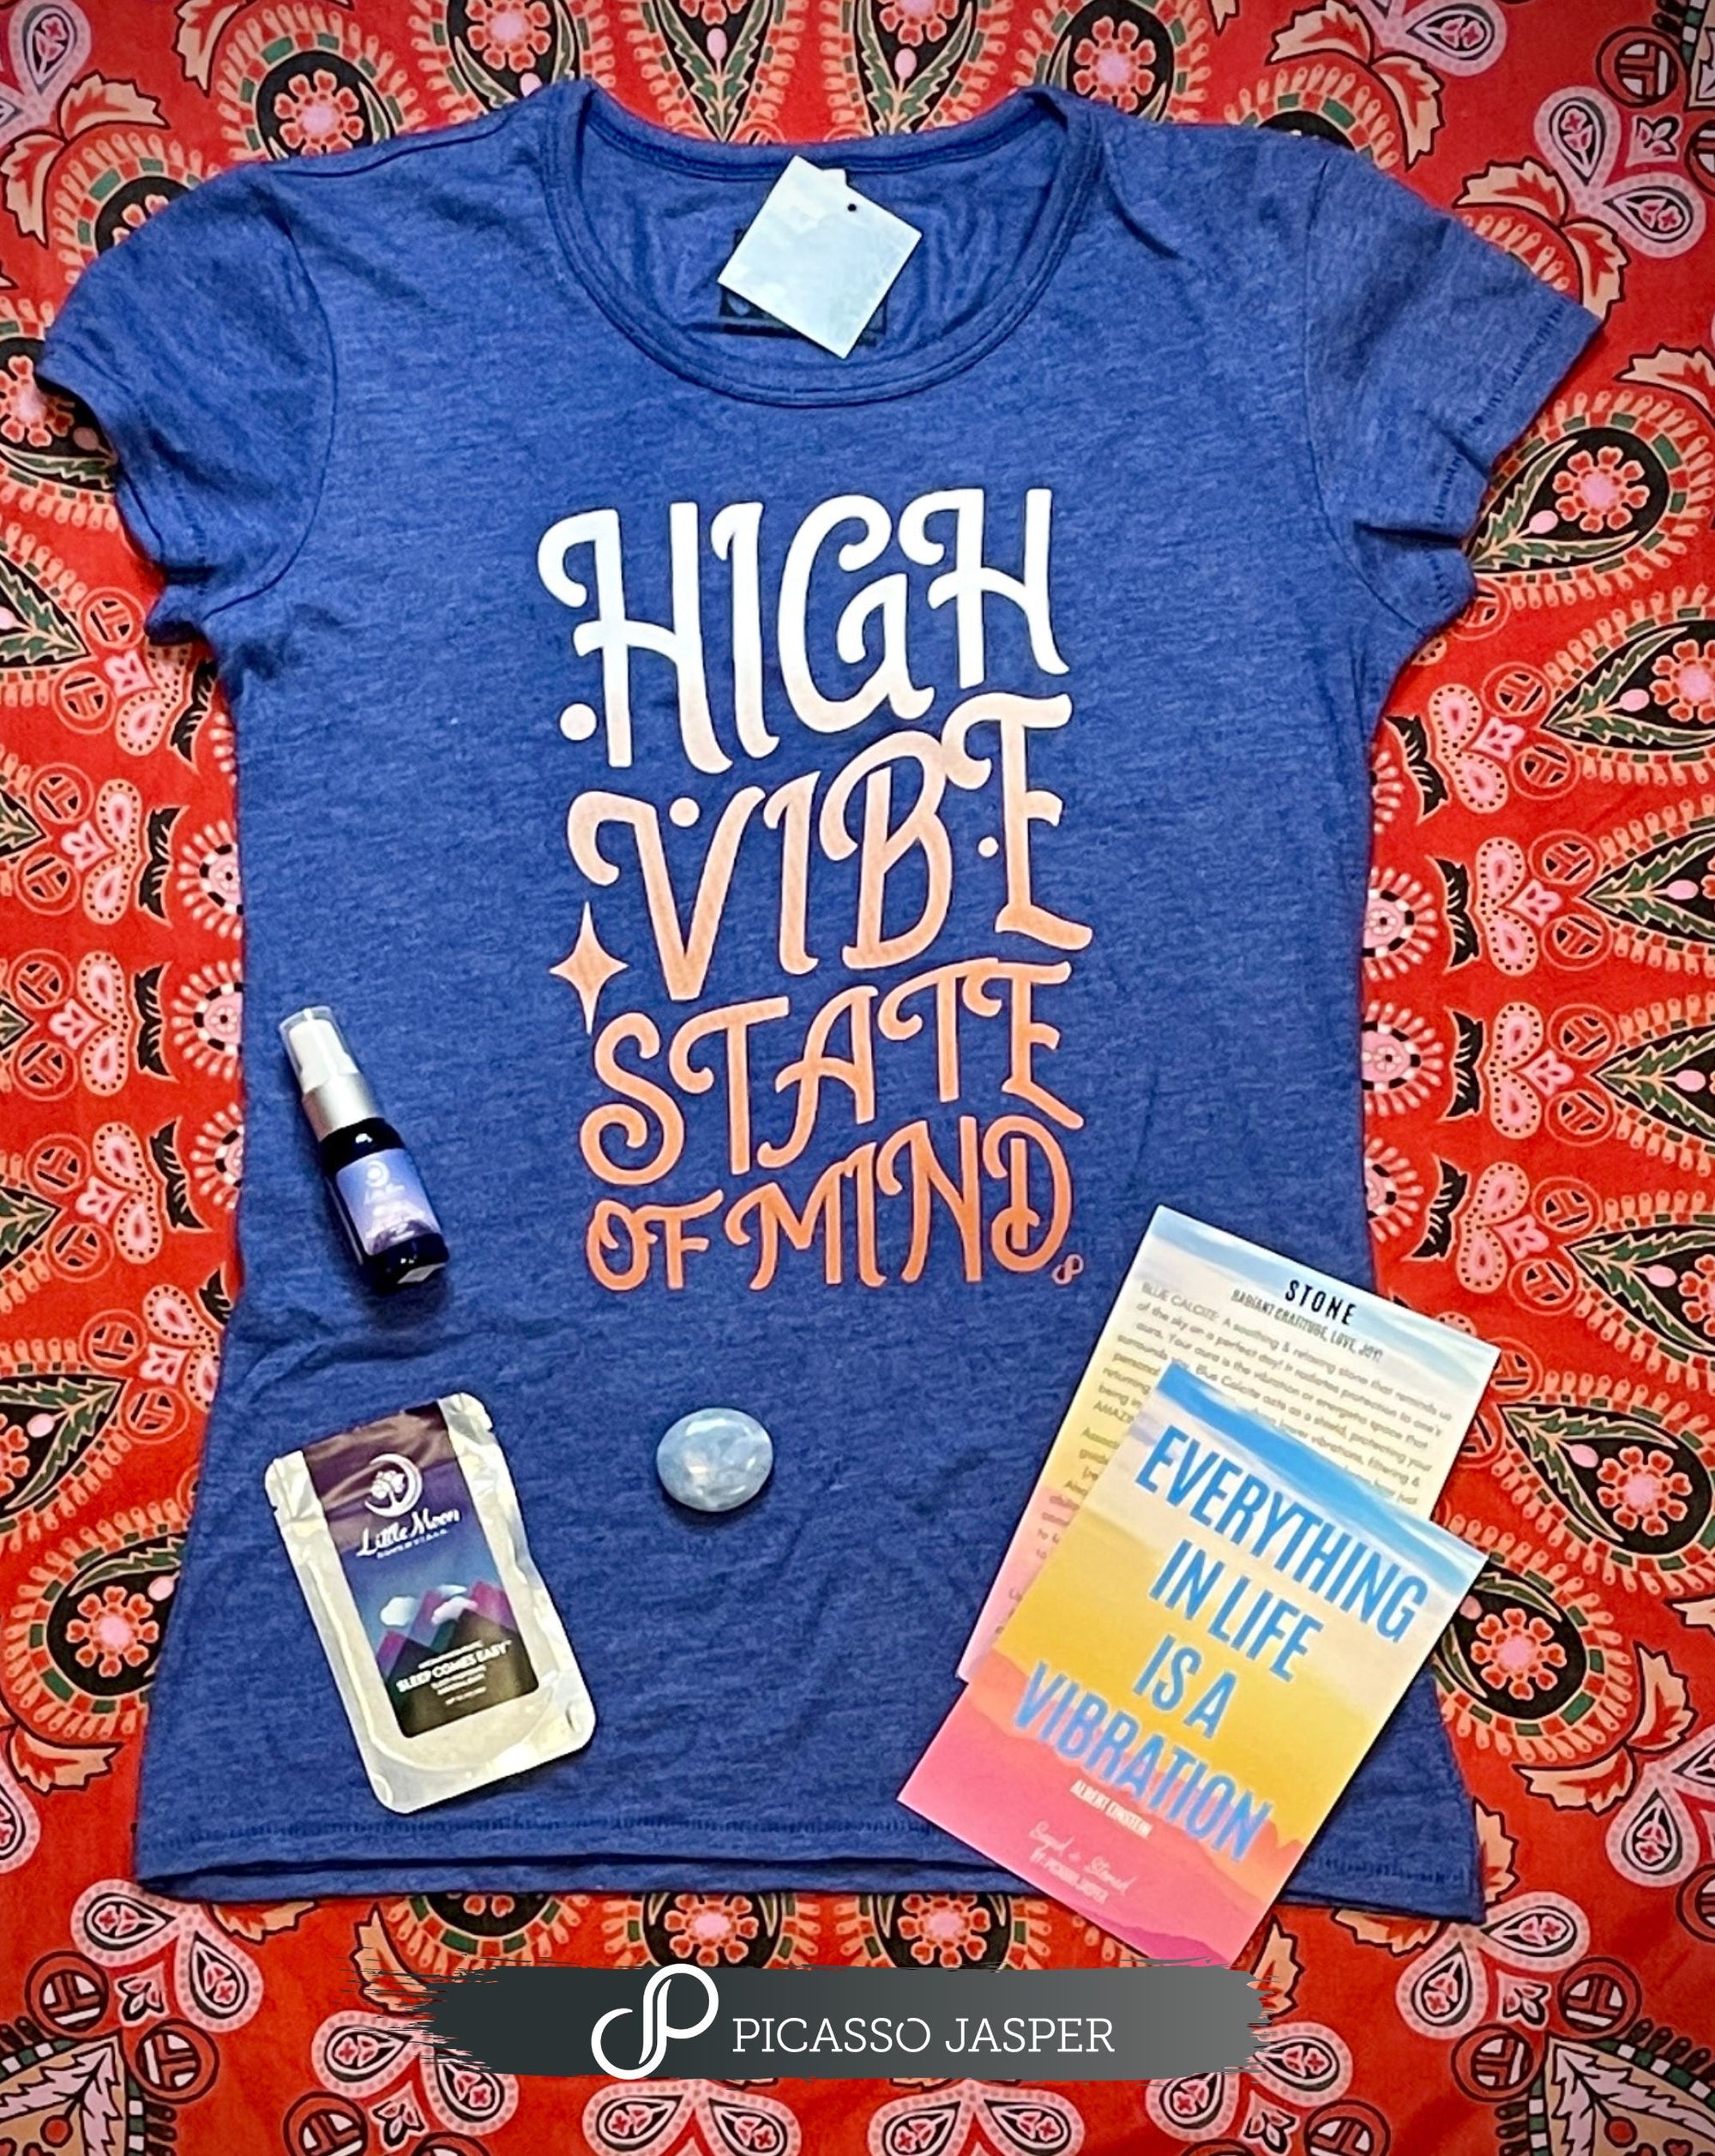 Last Ones! High Vibe State of Mind!- SAGED & STONED Ritual Bundle!